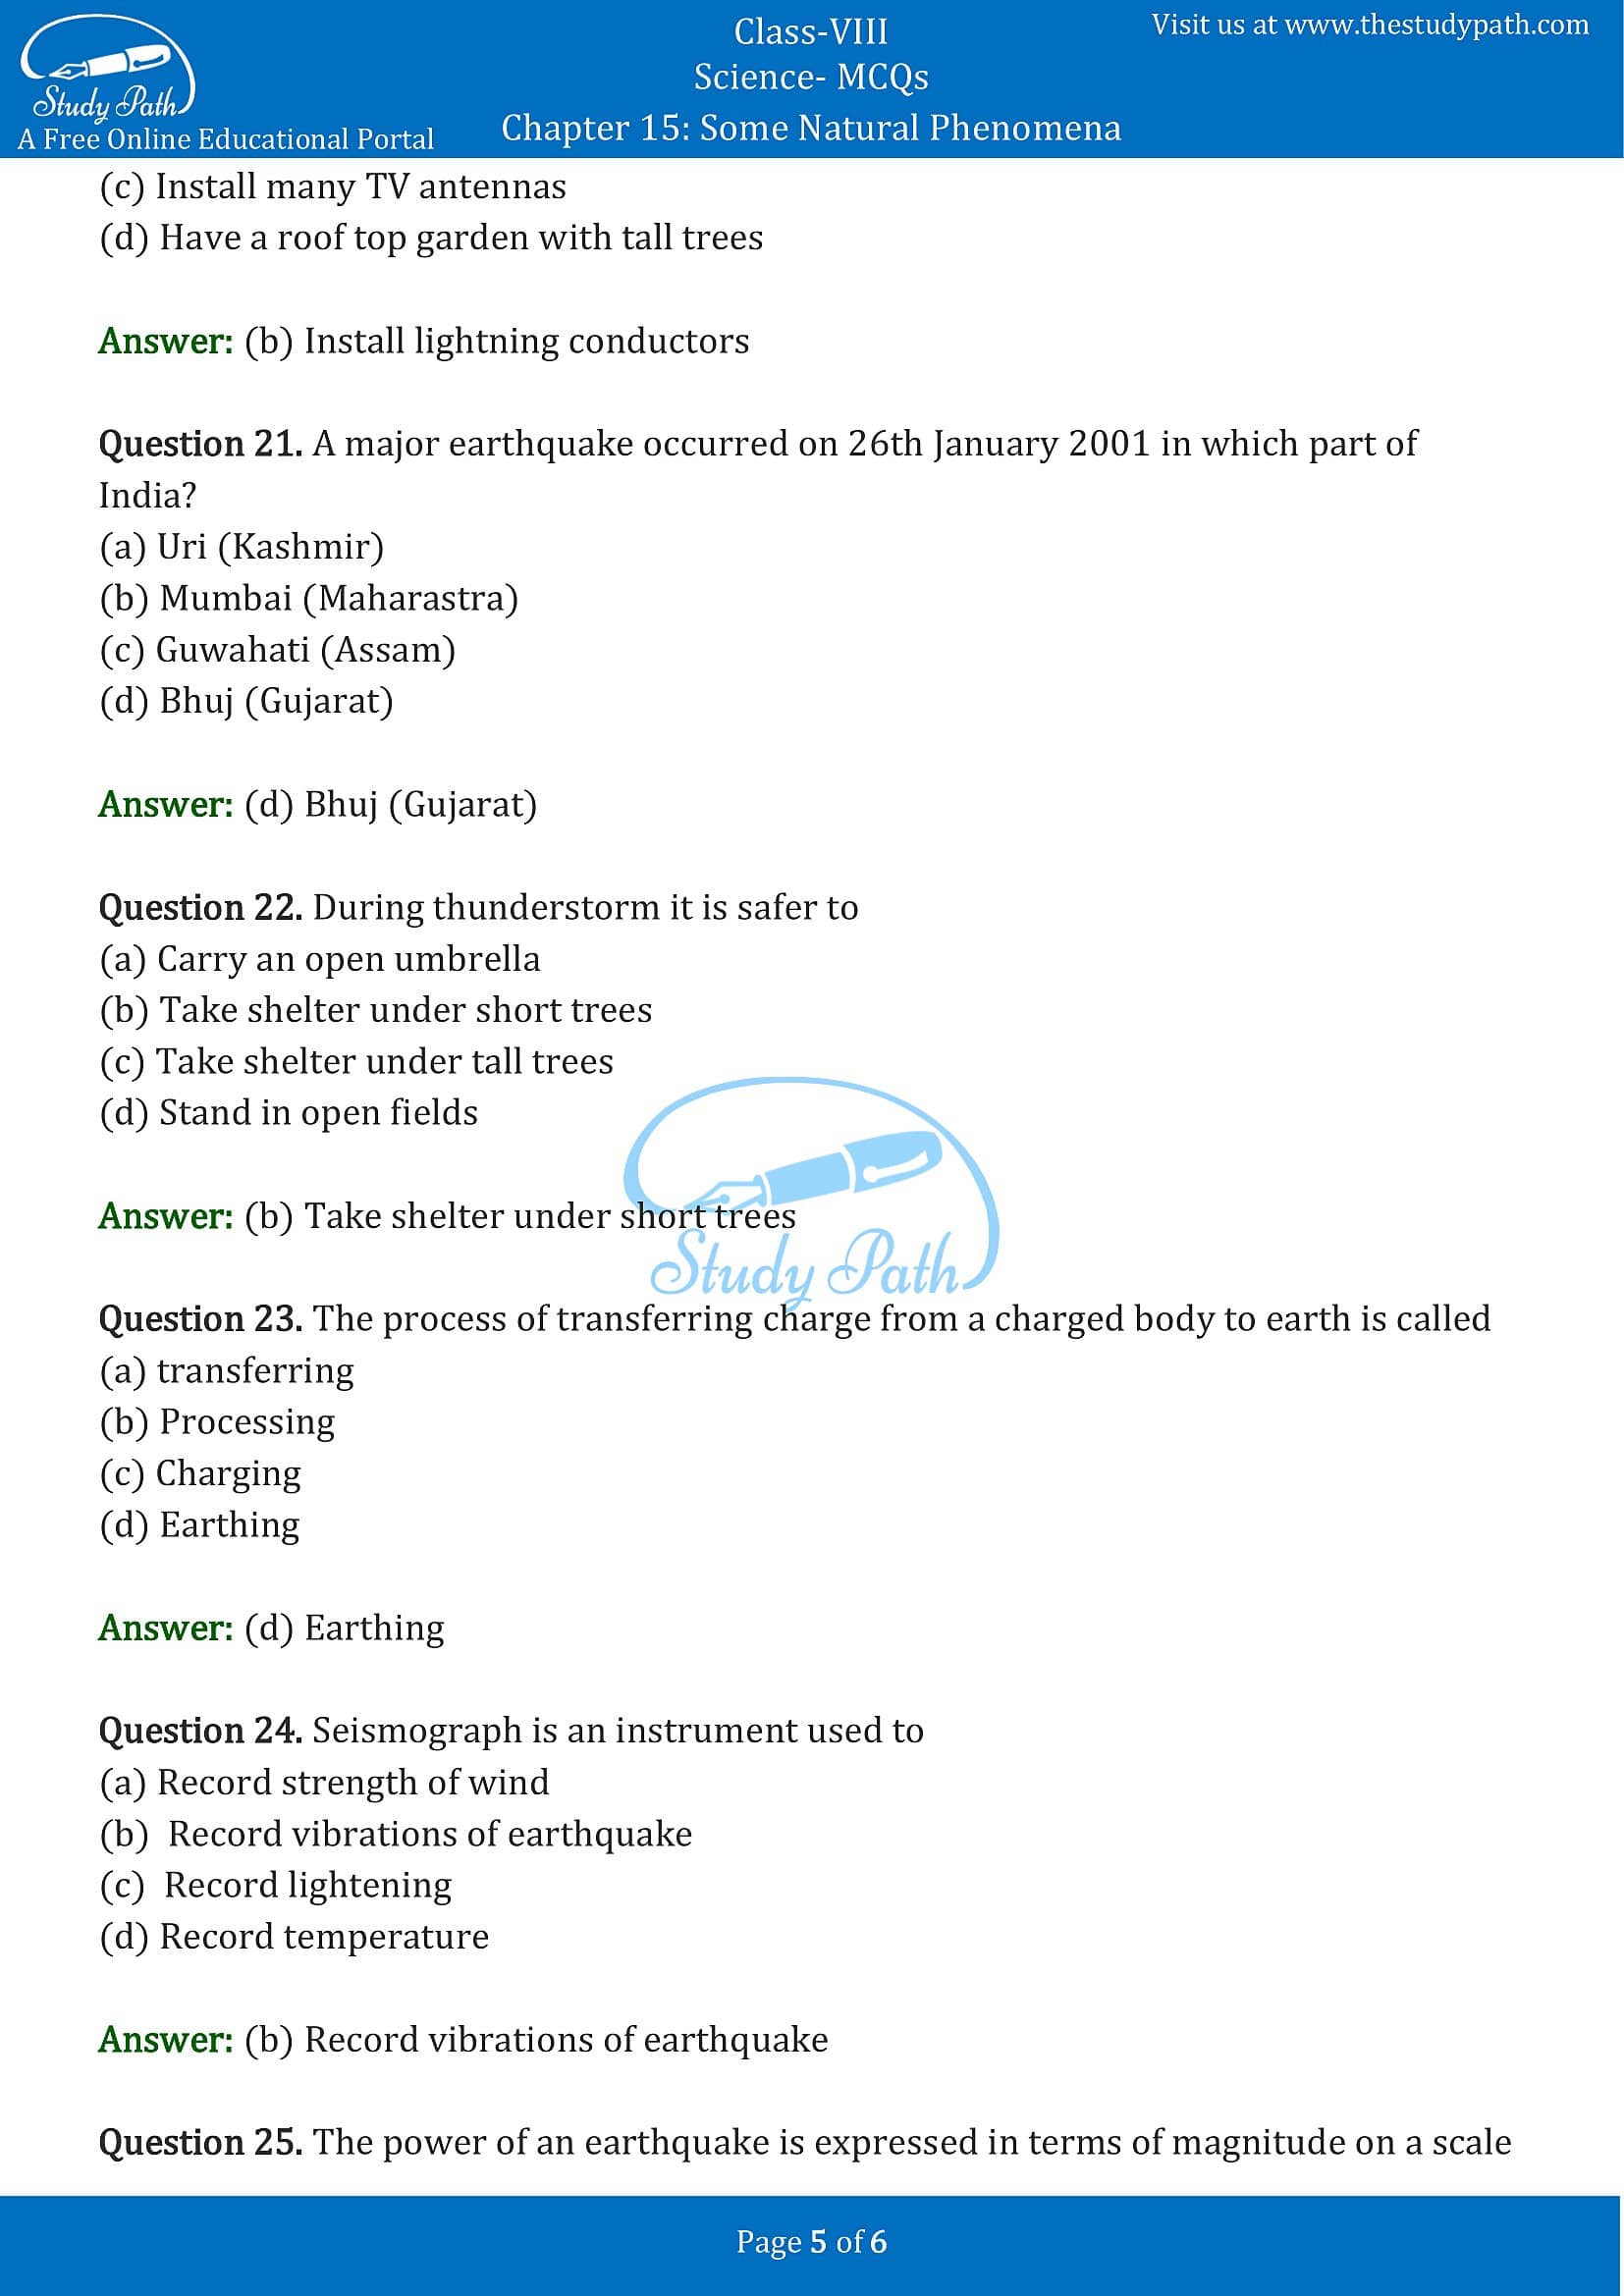 MCQ Questions for Class 8 Science Chapter 15 Some Natural Phenomena with Answers PDF -5